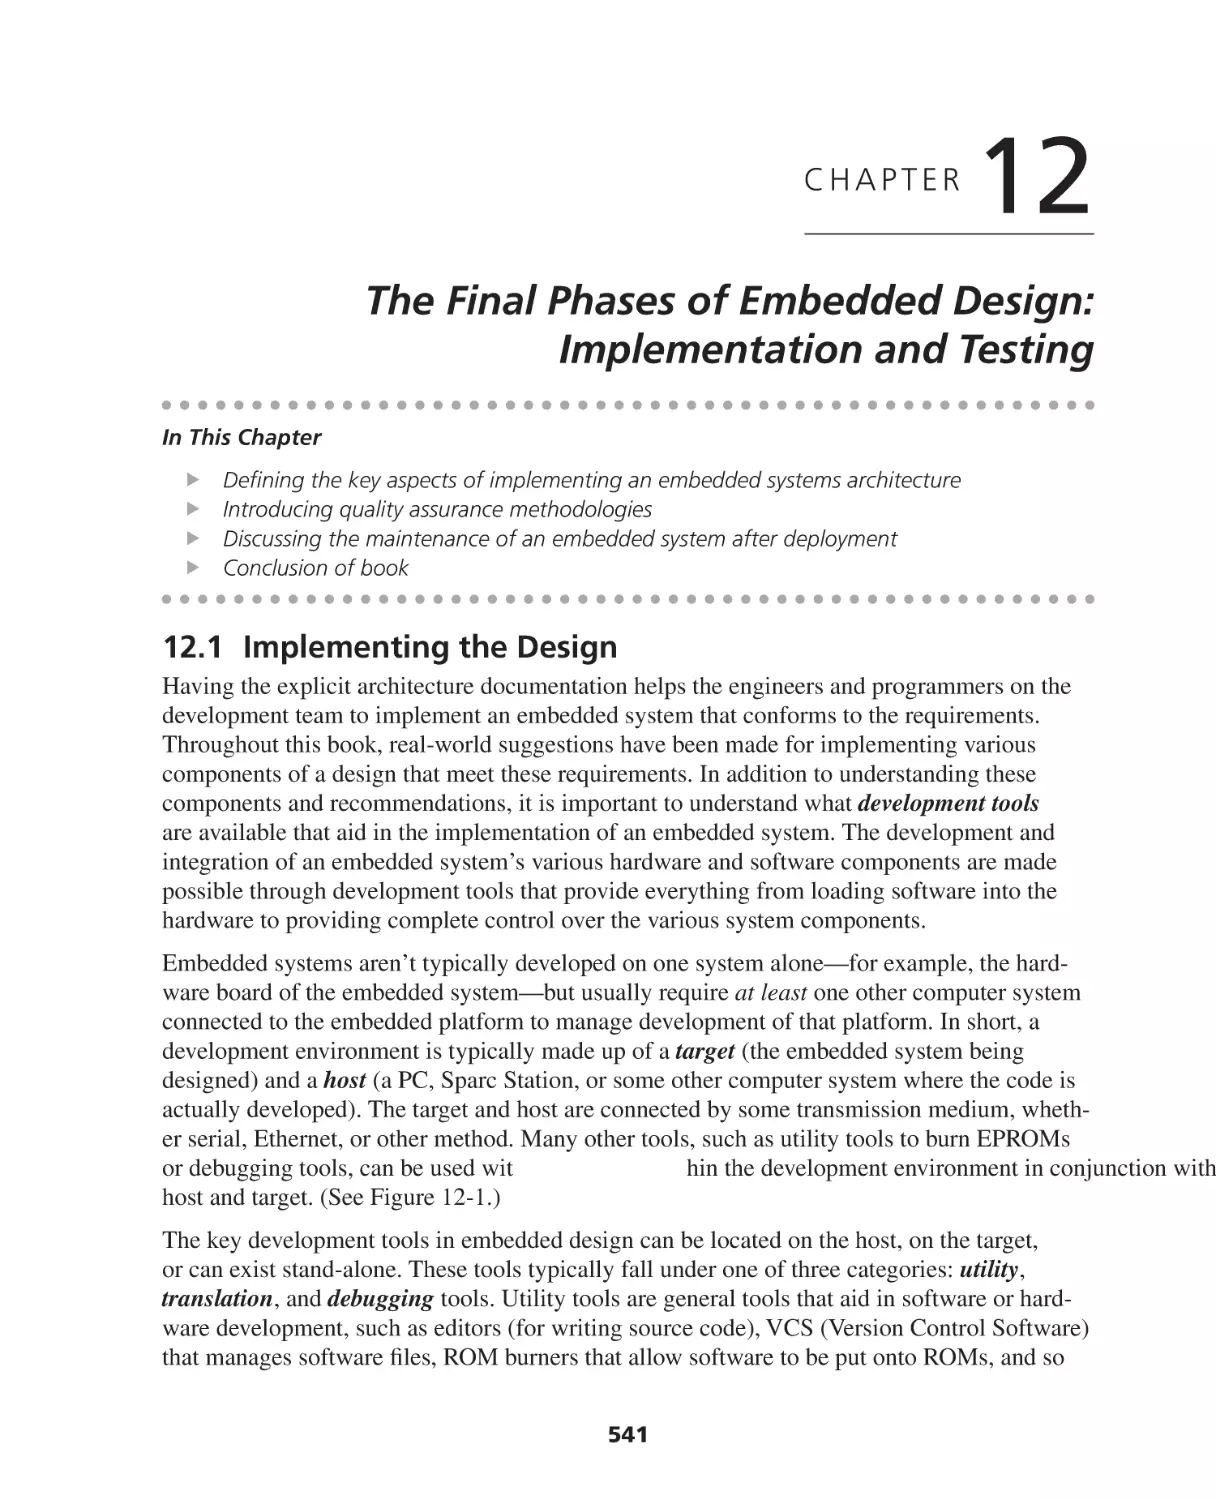 Chapter 12. The Final Phases of Embedded Design
12.1 Implementing the Design